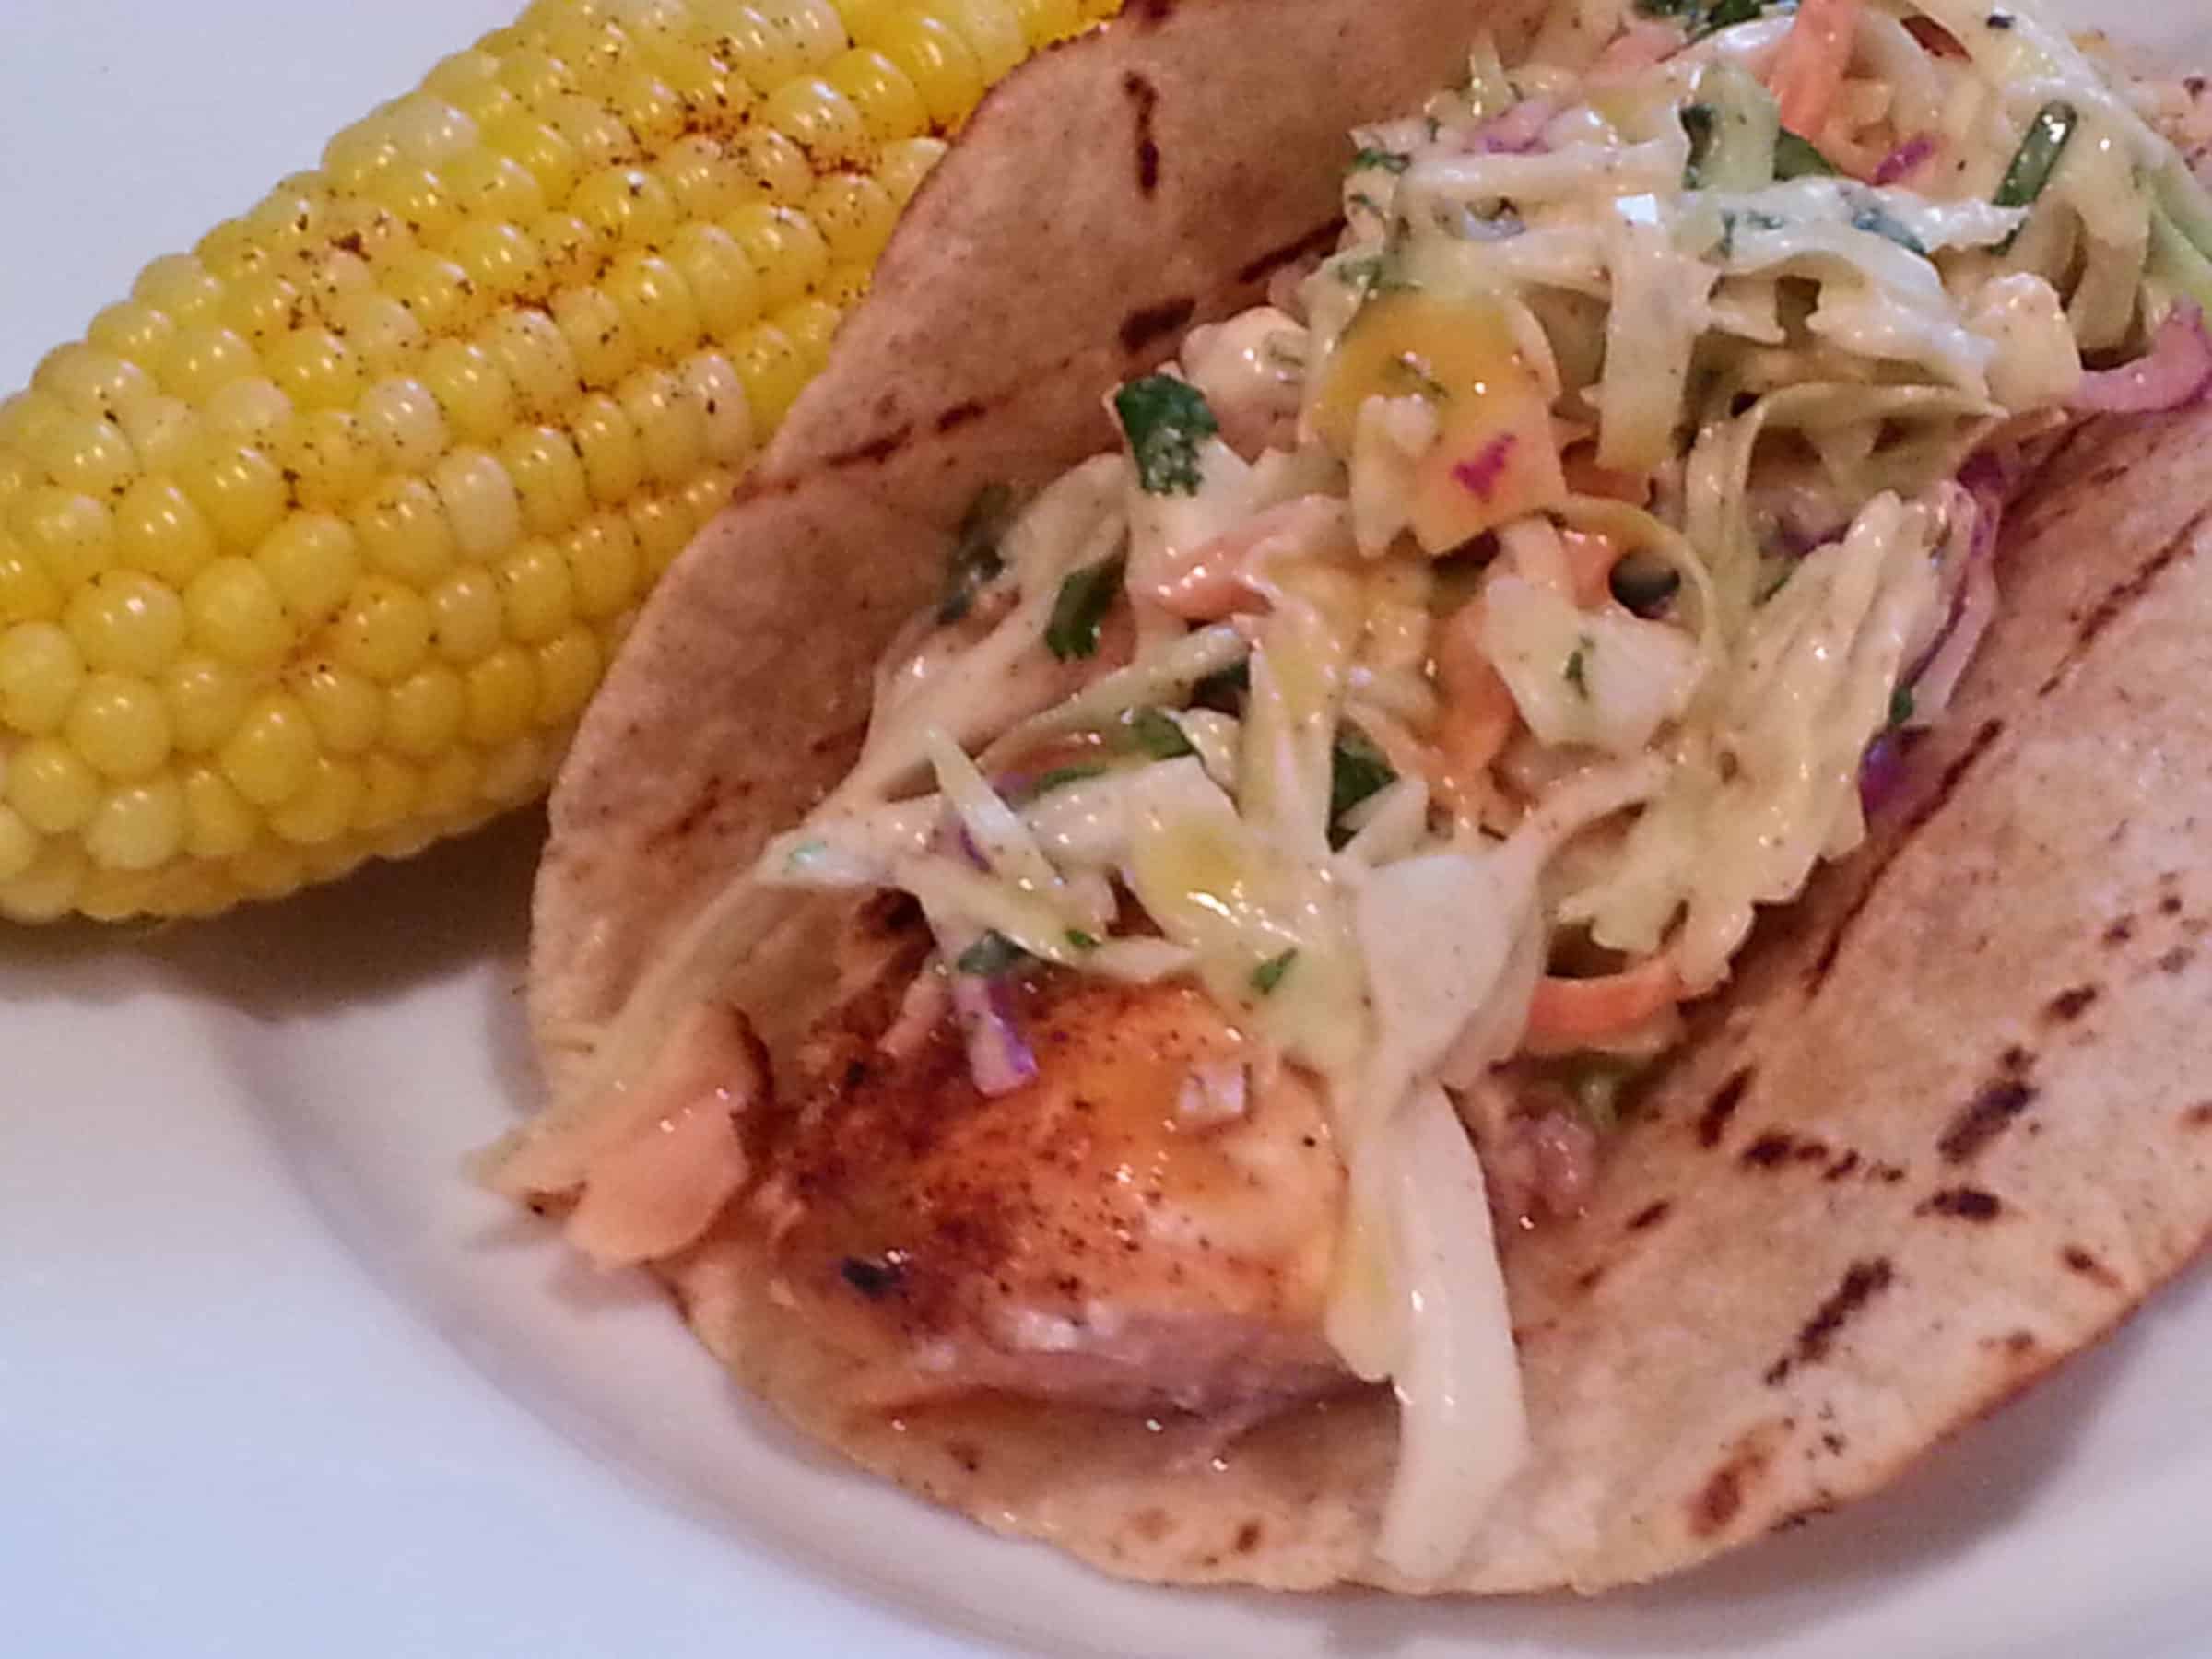 Salmon Tacos with Chipotle Cole Slaw and Orange-Jalapeno Sauce